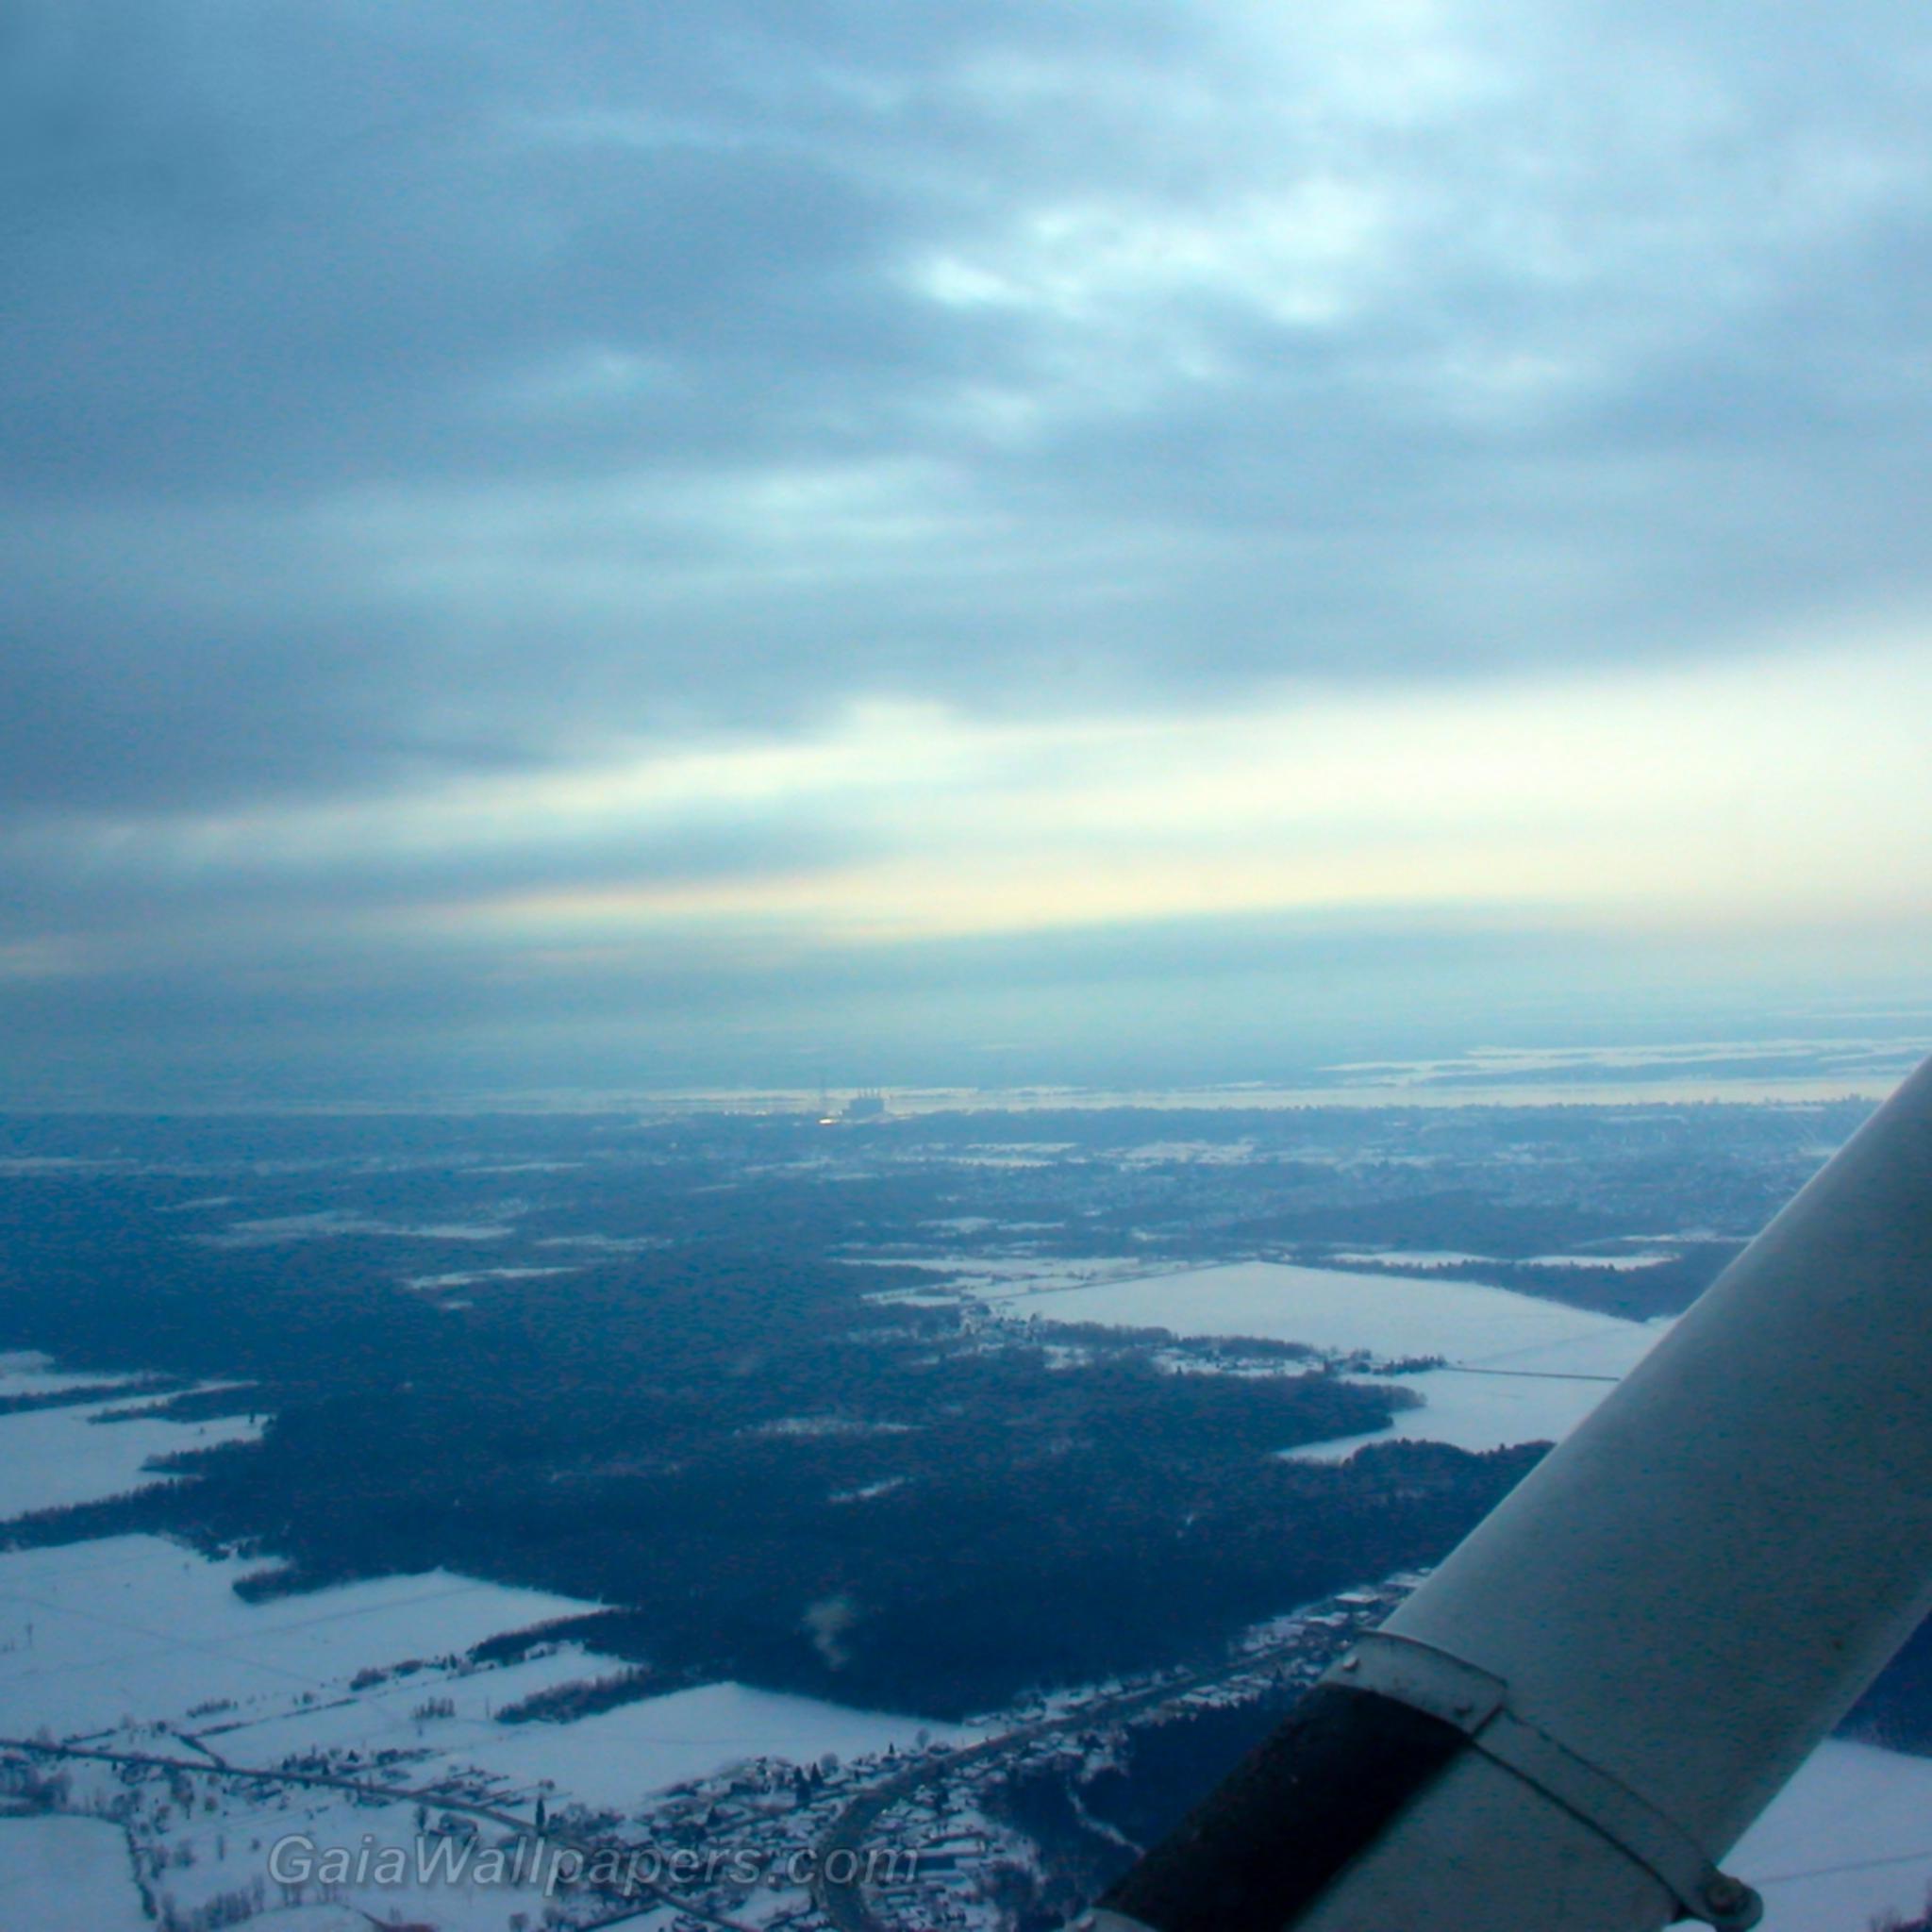 Sorel-Tracy seen in the horizon from a Cessna during the winter - Free desktop wallpapers